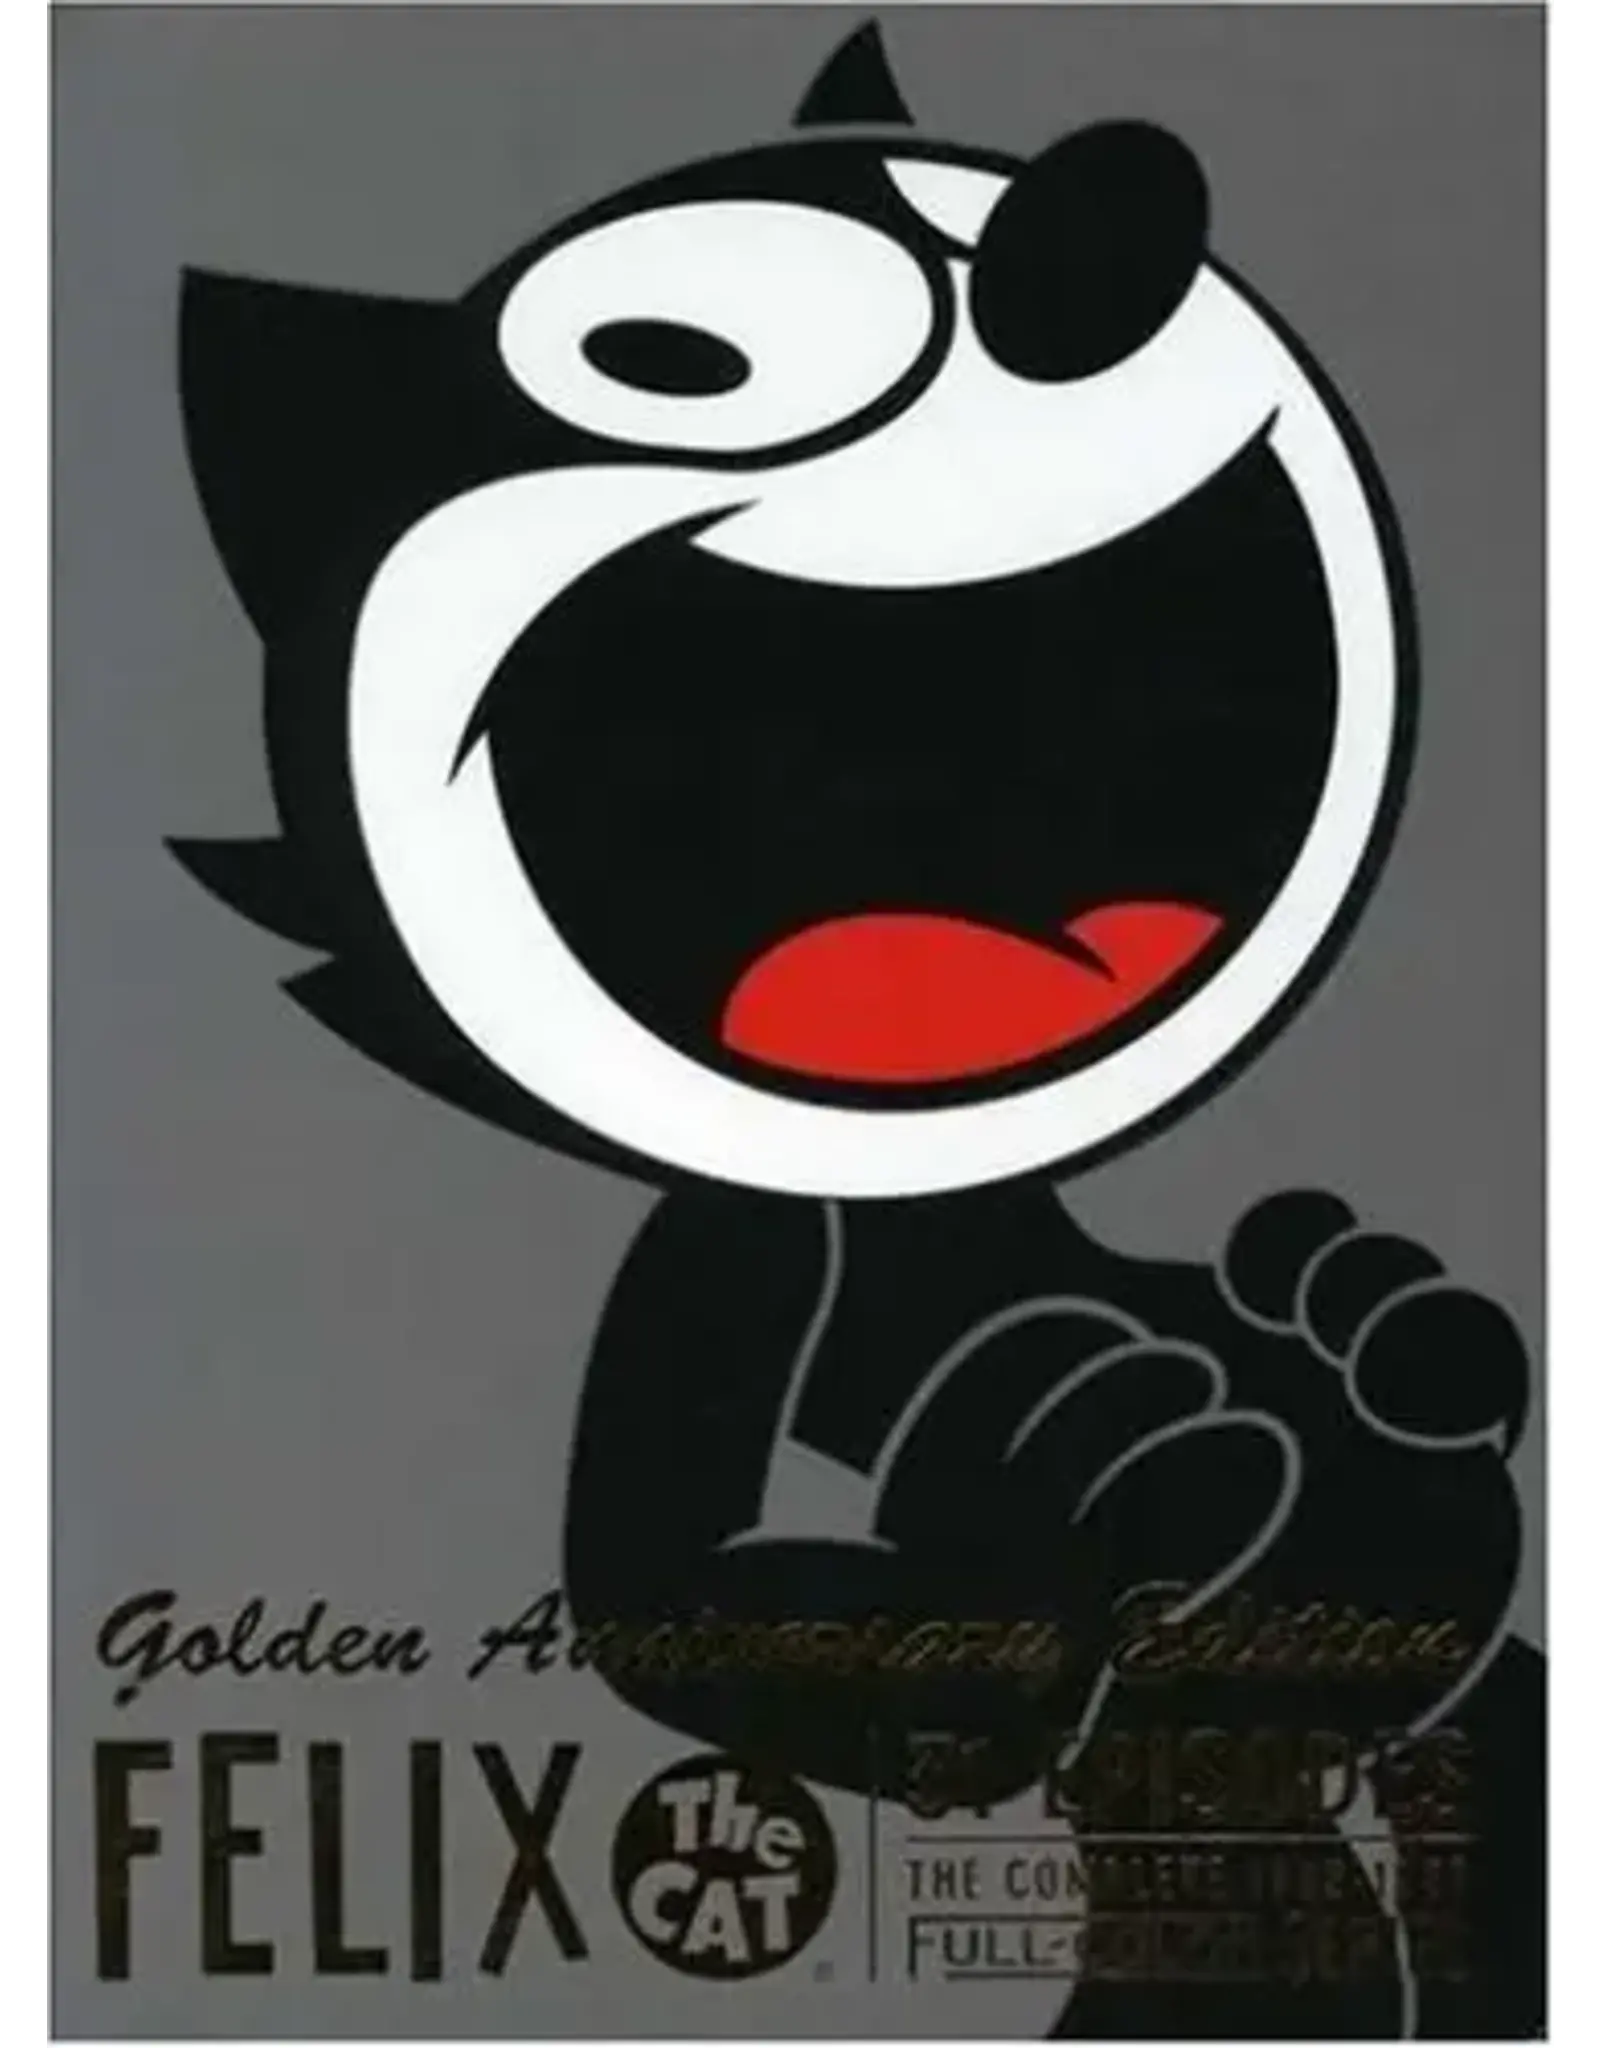 Anime & Animation Felix the Cat The Complete 1958-1959 Full-Color Series Golden Anniversary Edition (Used)